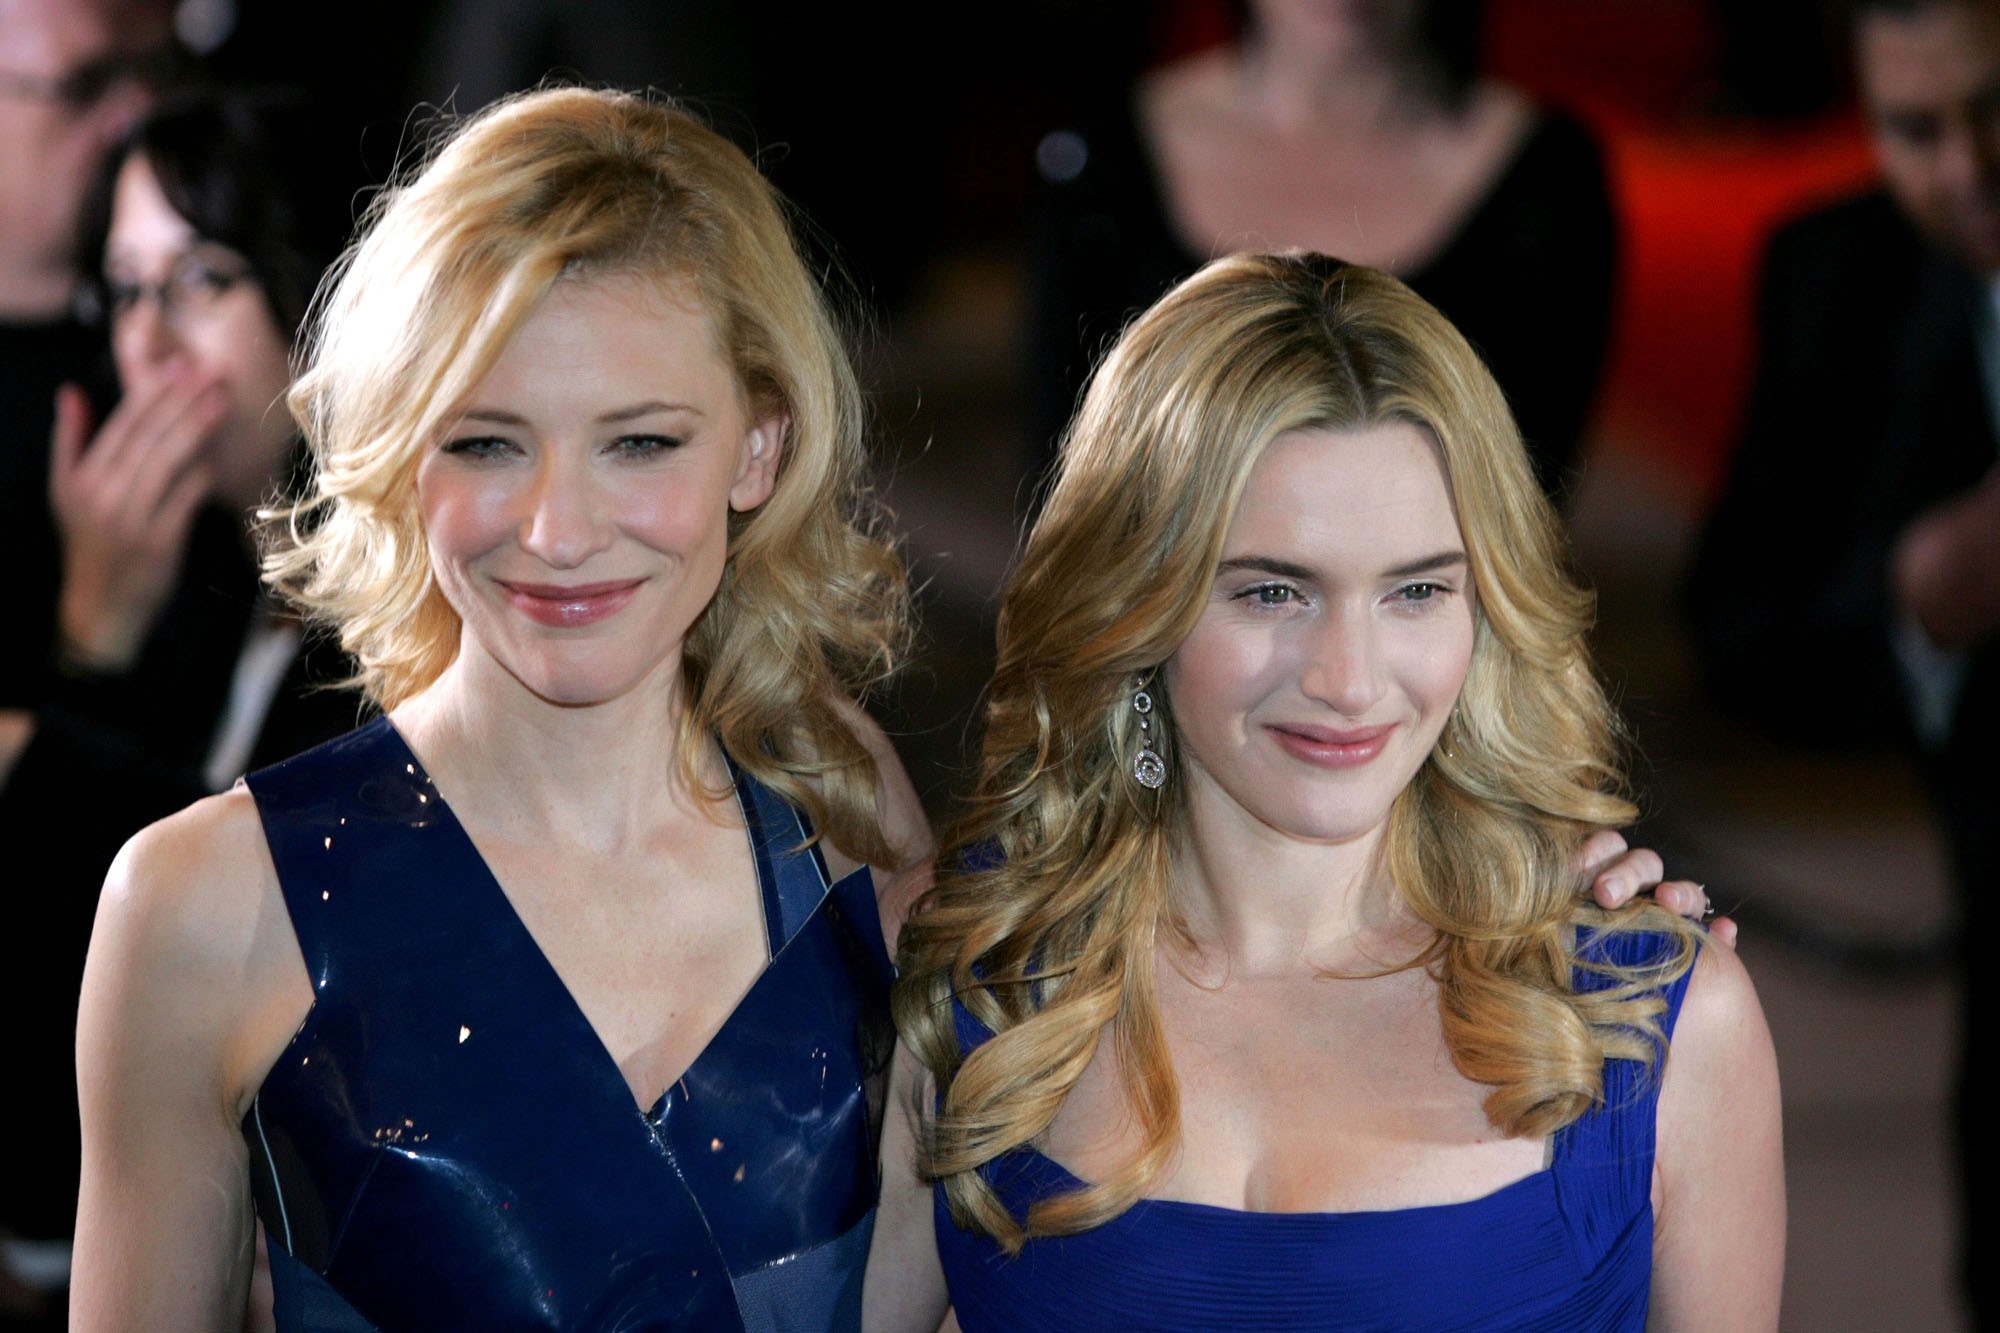 Cate Blanchett and Kate Winslet, iconic actresses, grace the screen together.